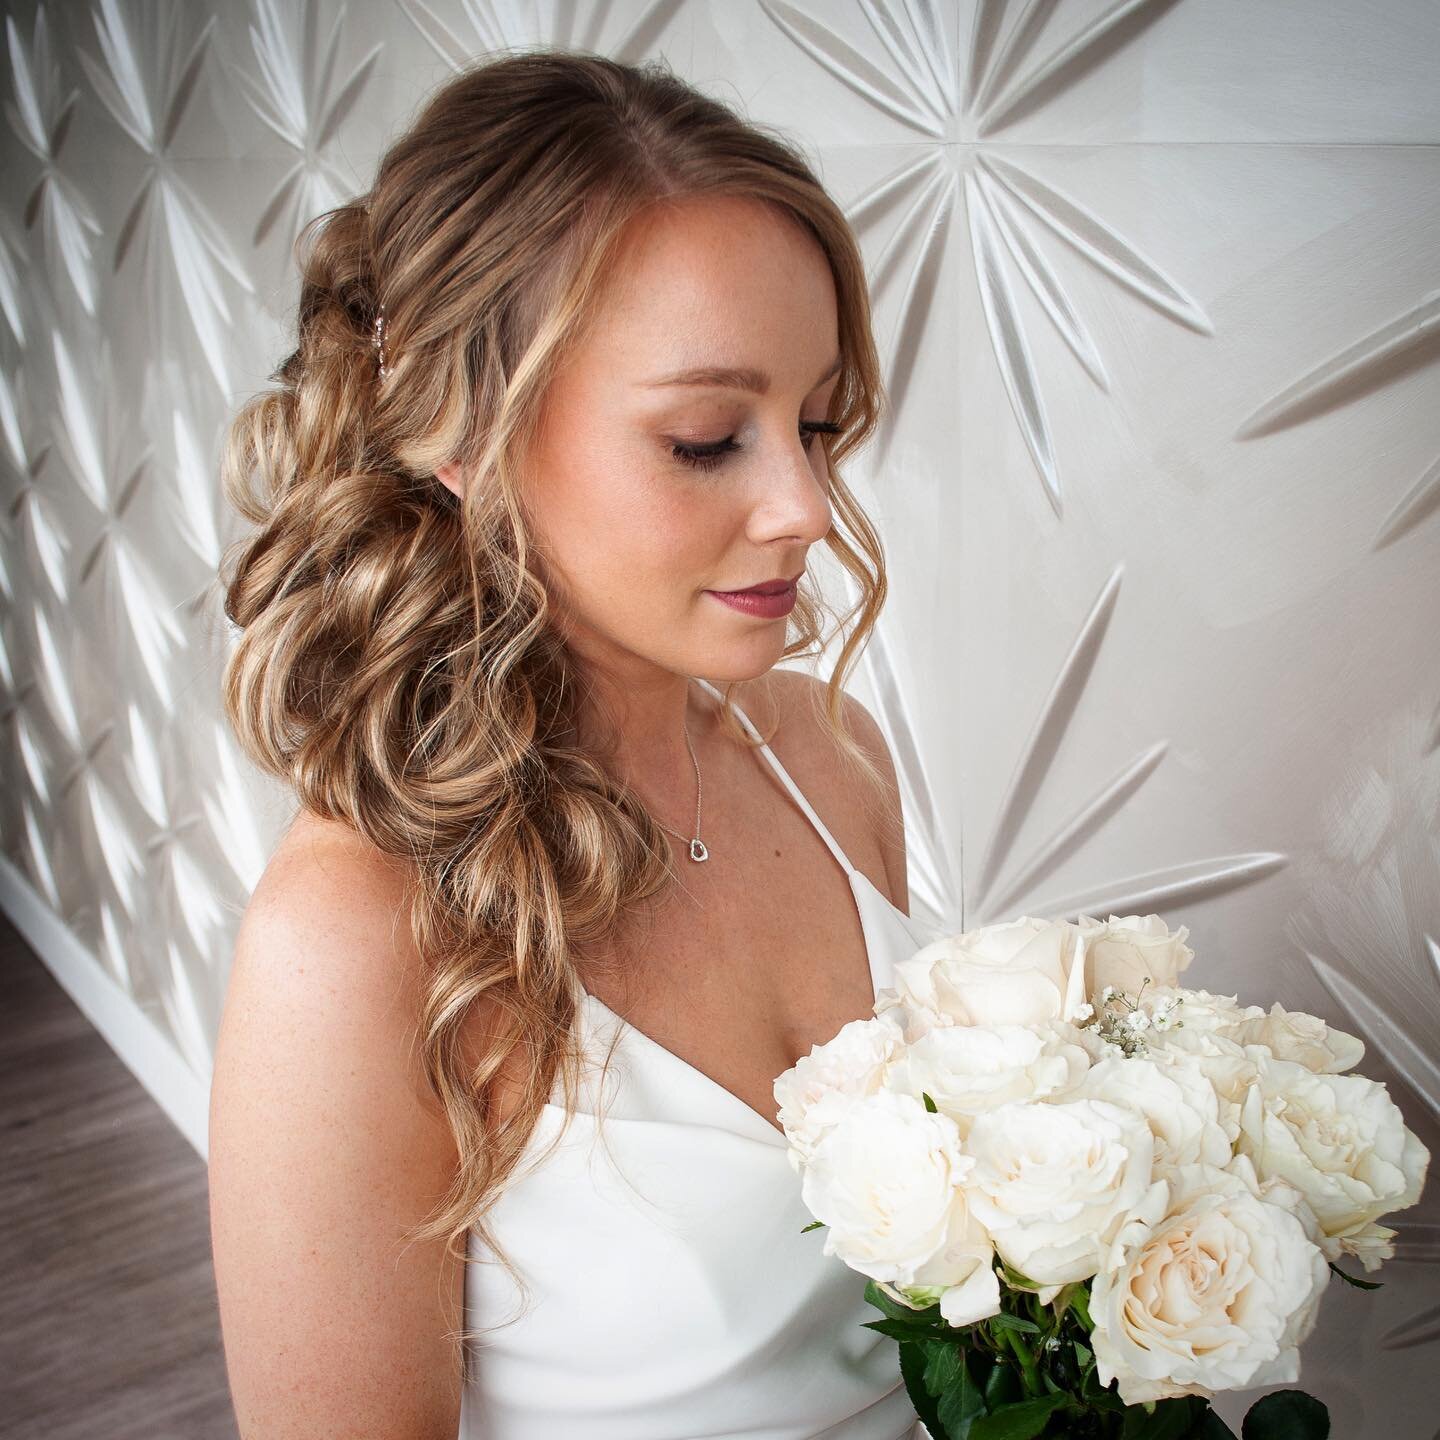 Beauty is how you feel inside. And your hair is your crown you never take off✨

#weddinghairinspo #2021bride #bridetobe2021 #longislandbridalhair #lihairstylist #libridalhairstylist #blondebridalhair #eleganthairstyles #longislandhair #liweddinghair 